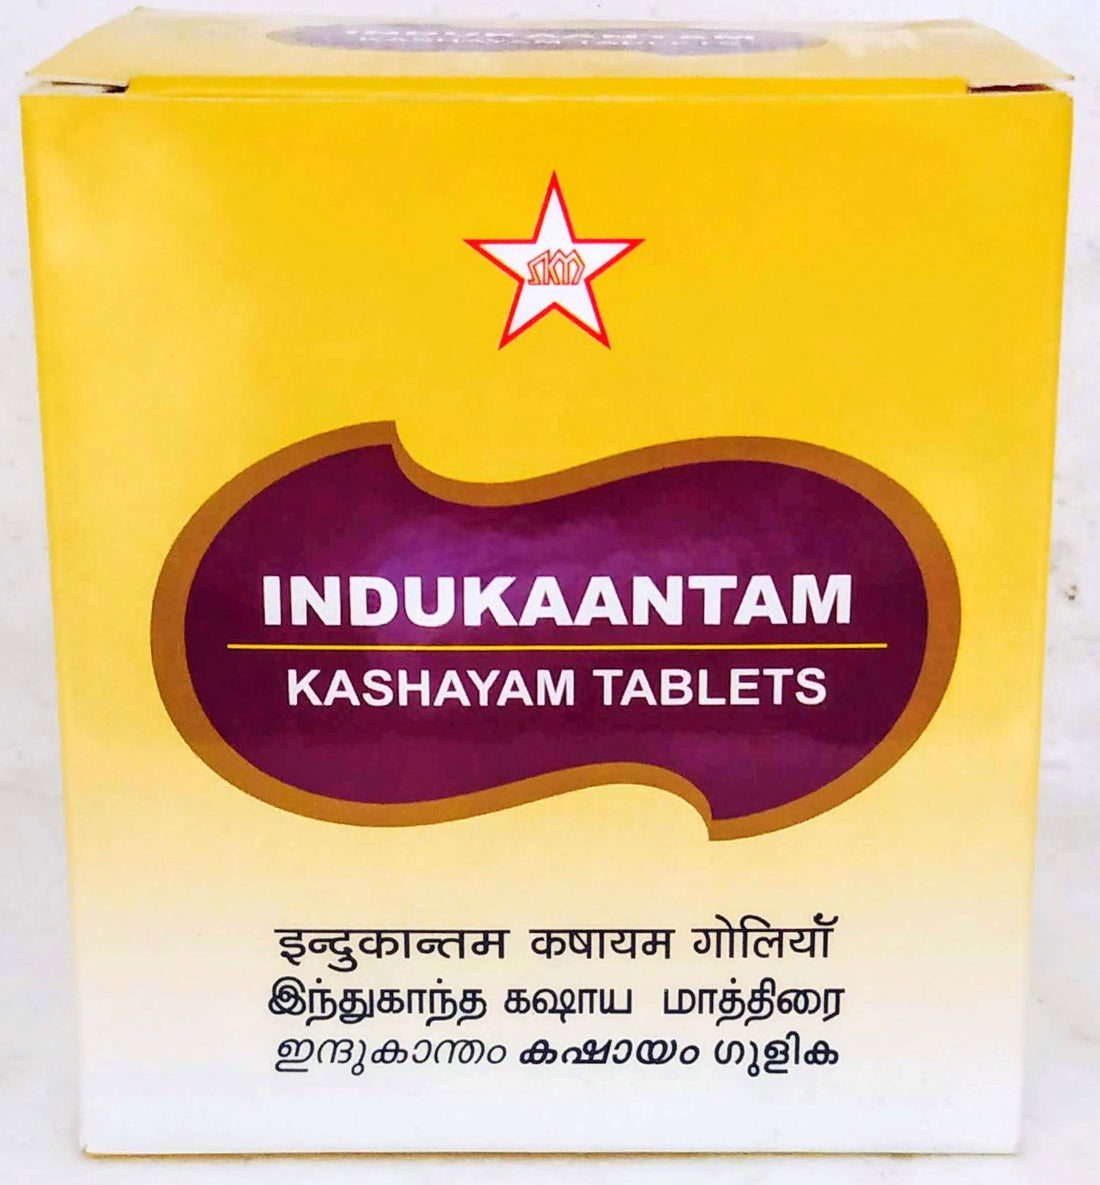 Shop Indukantham Kashayam 10Tablets at price 40.00 from SKM Online - Ayush Care